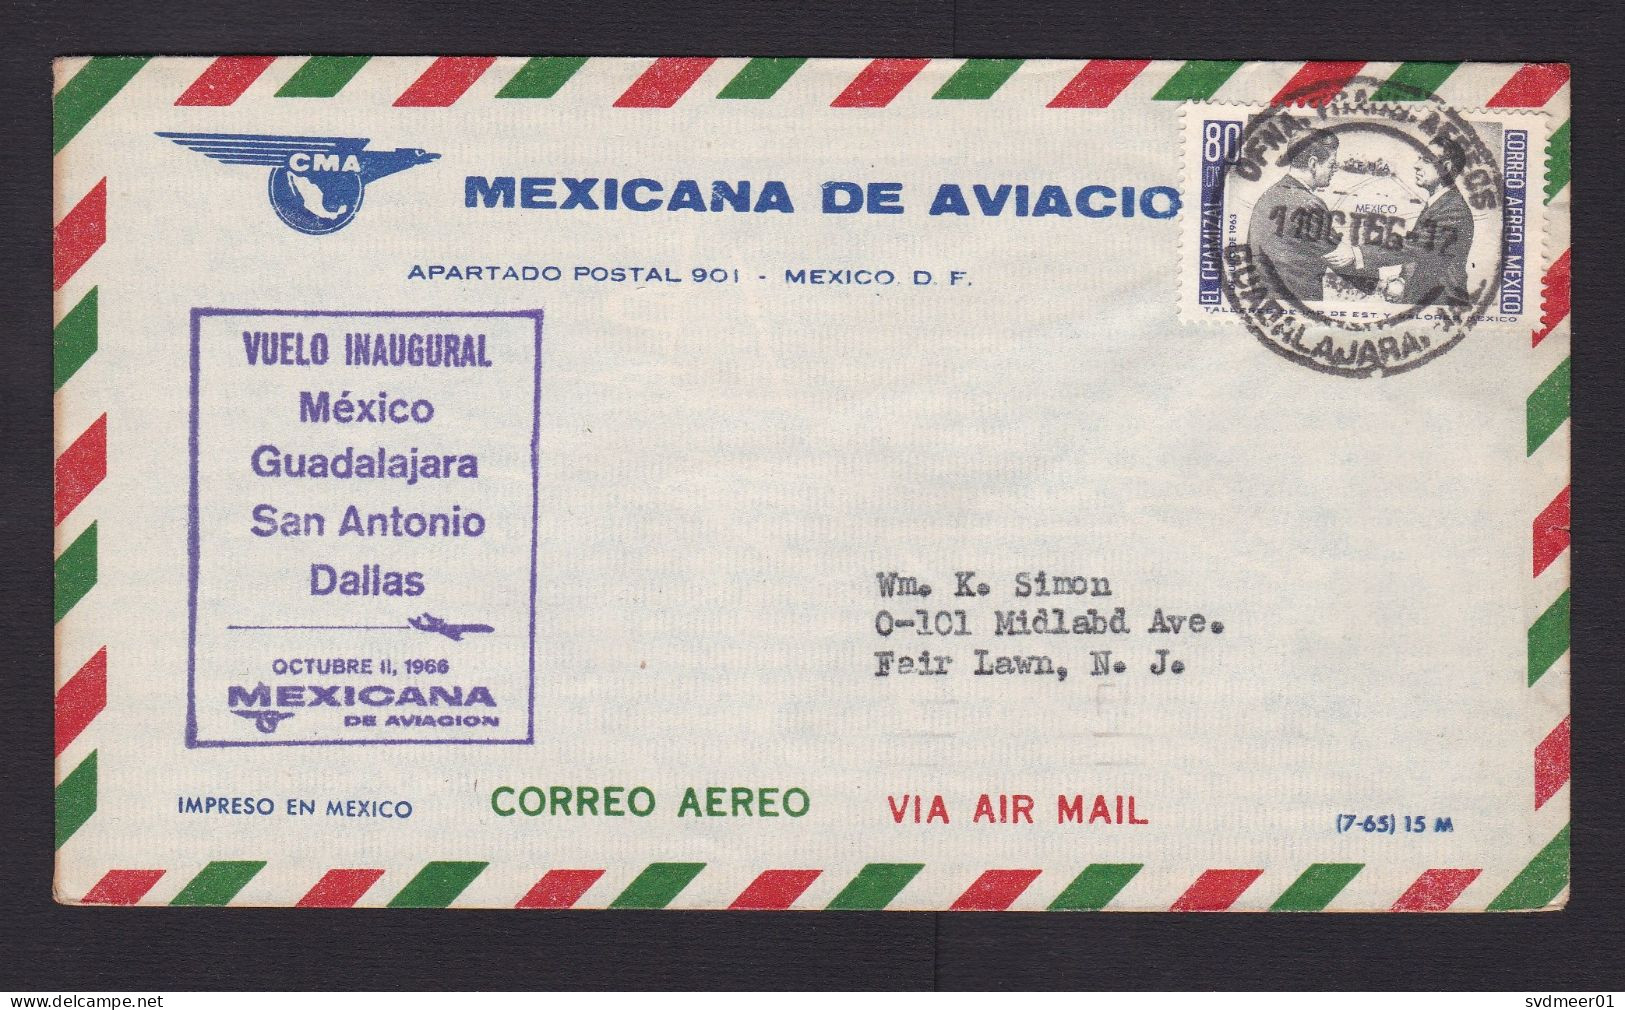 Mexico: FFC First Flight Cover To USA, 1966, 1 Stamp, Visit Kennedy, CMA Mexicana Airlines, Dallas (minor Discolouring) - Mexique